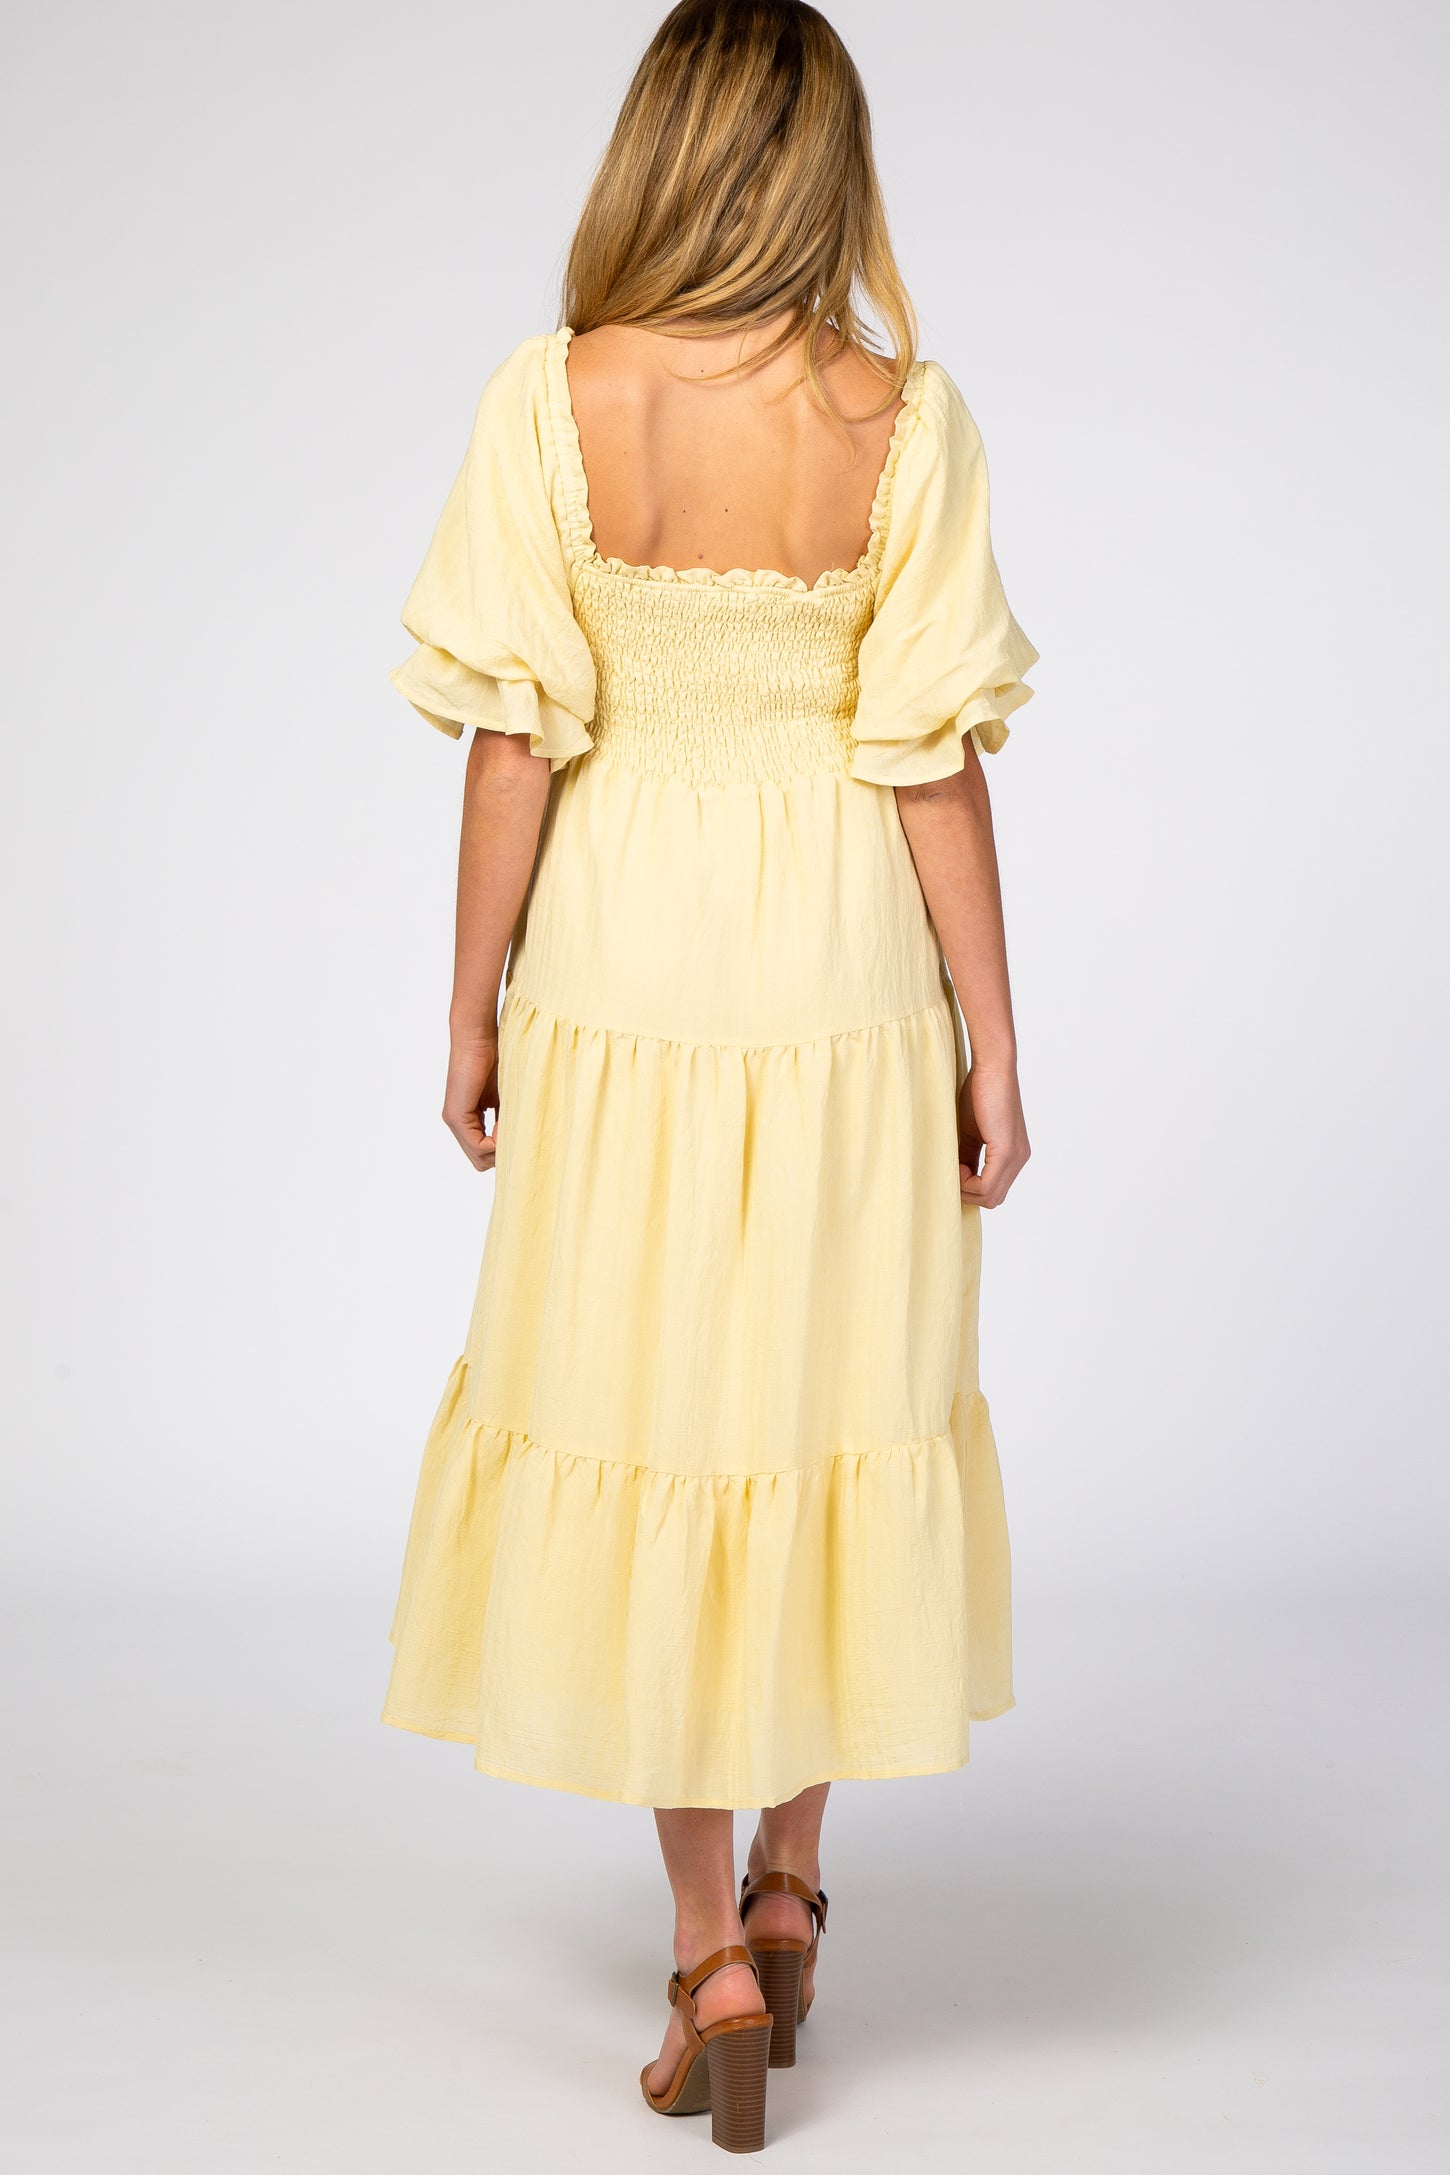 Yellow Smocked Tiered Maternity Dress